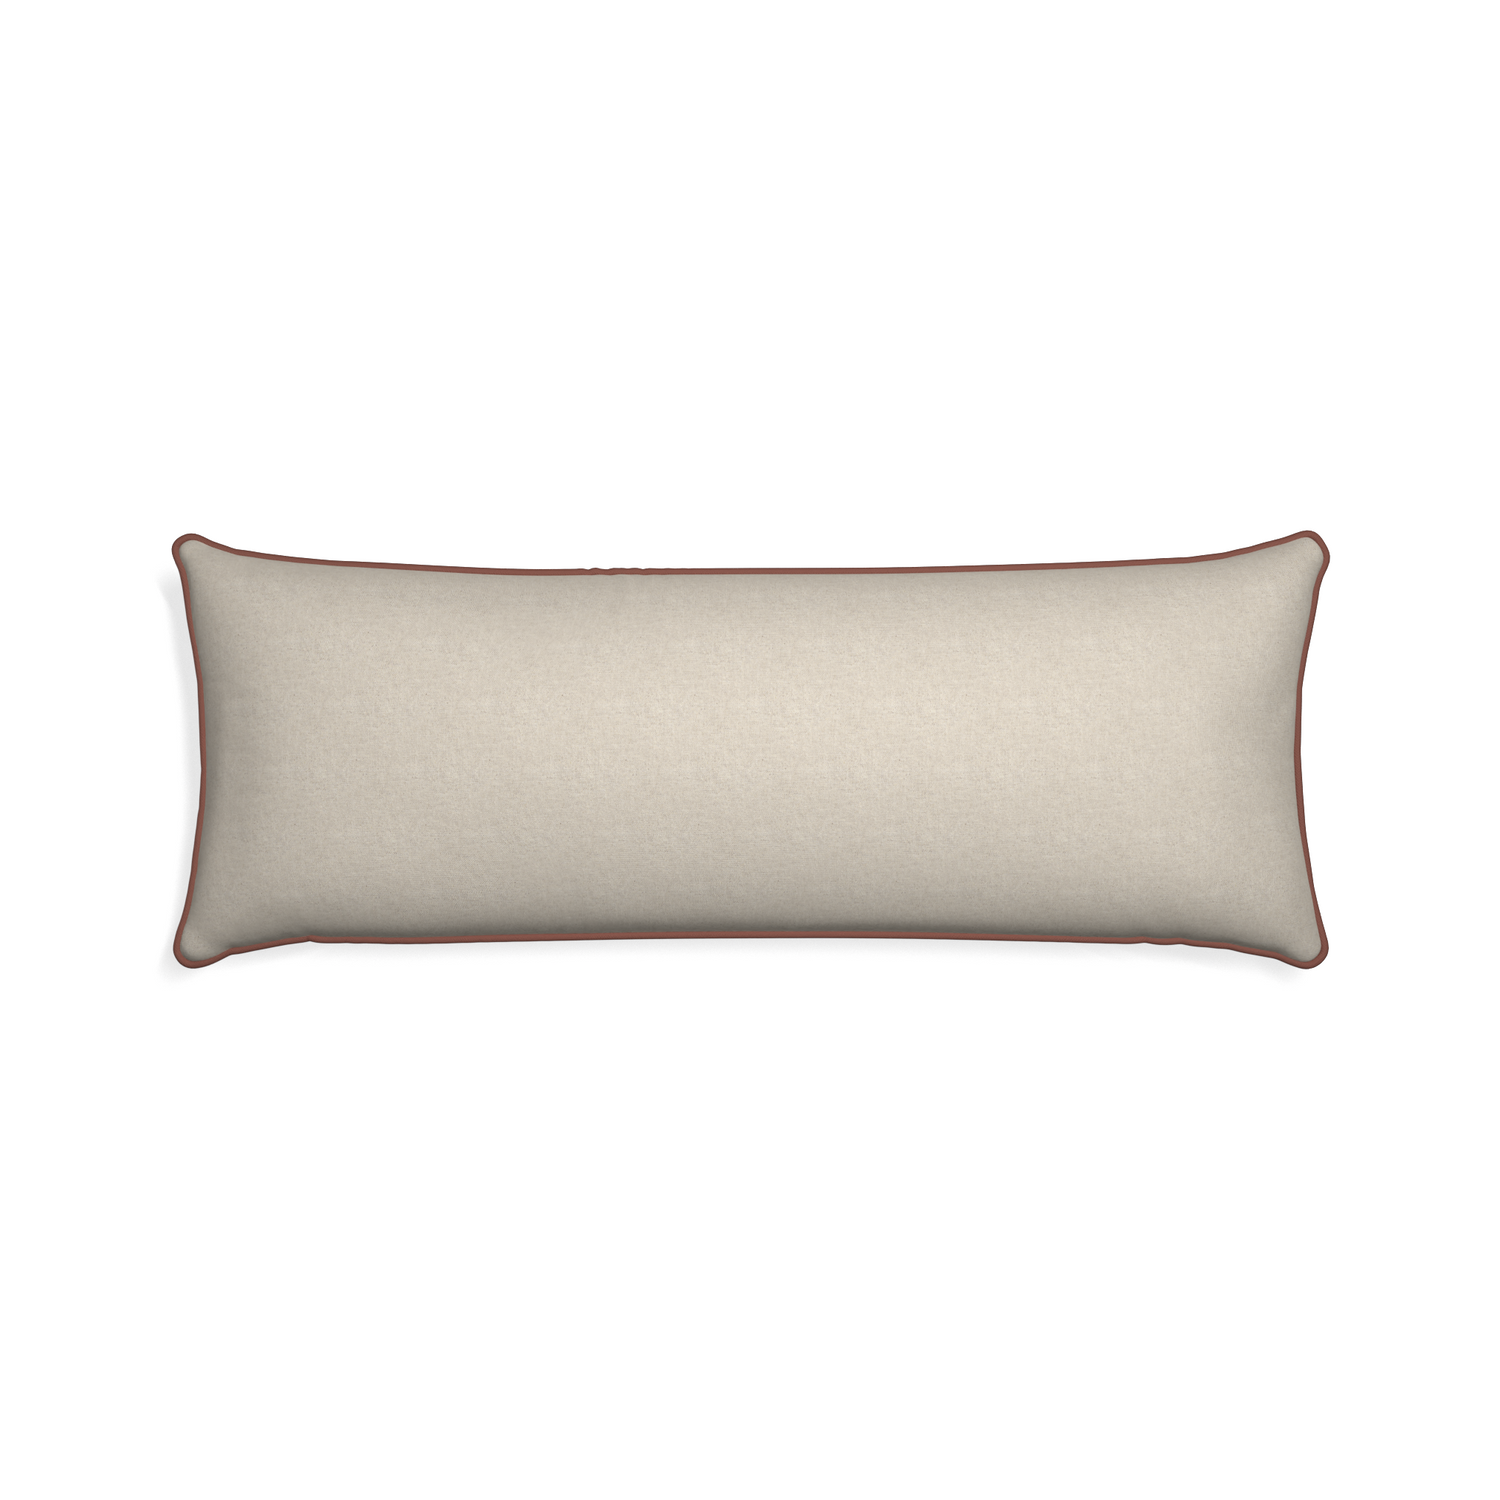 Xl-lumbar oat custom light brownpillow with w piping on white background